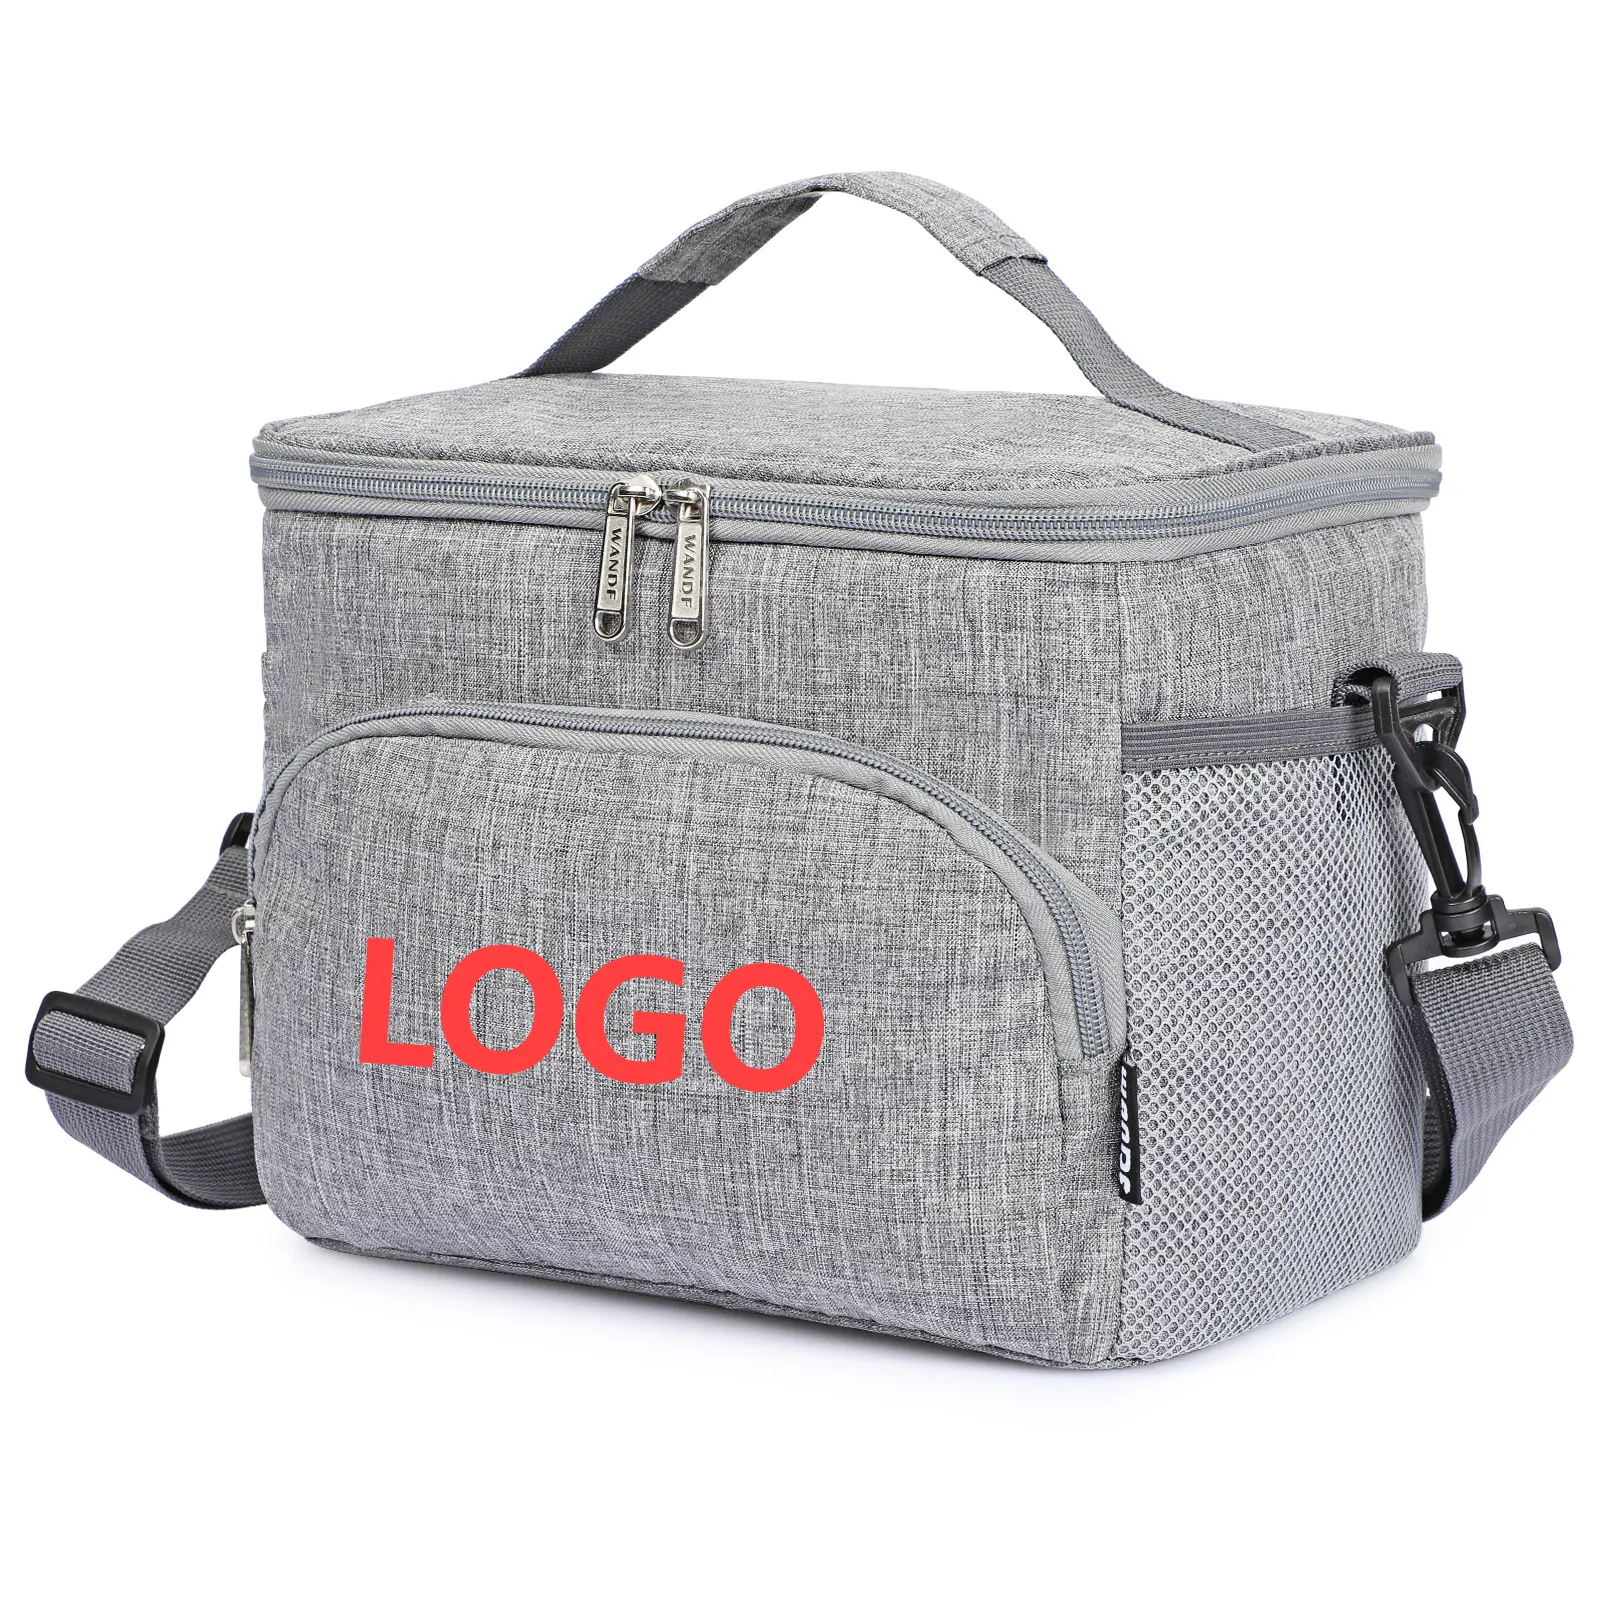 Wholesale Picnic Thermal Lunch Box Bag Insulated Bento Cooler Printing Thermal Lunch Bags Portable Shoulder Lunch Bag